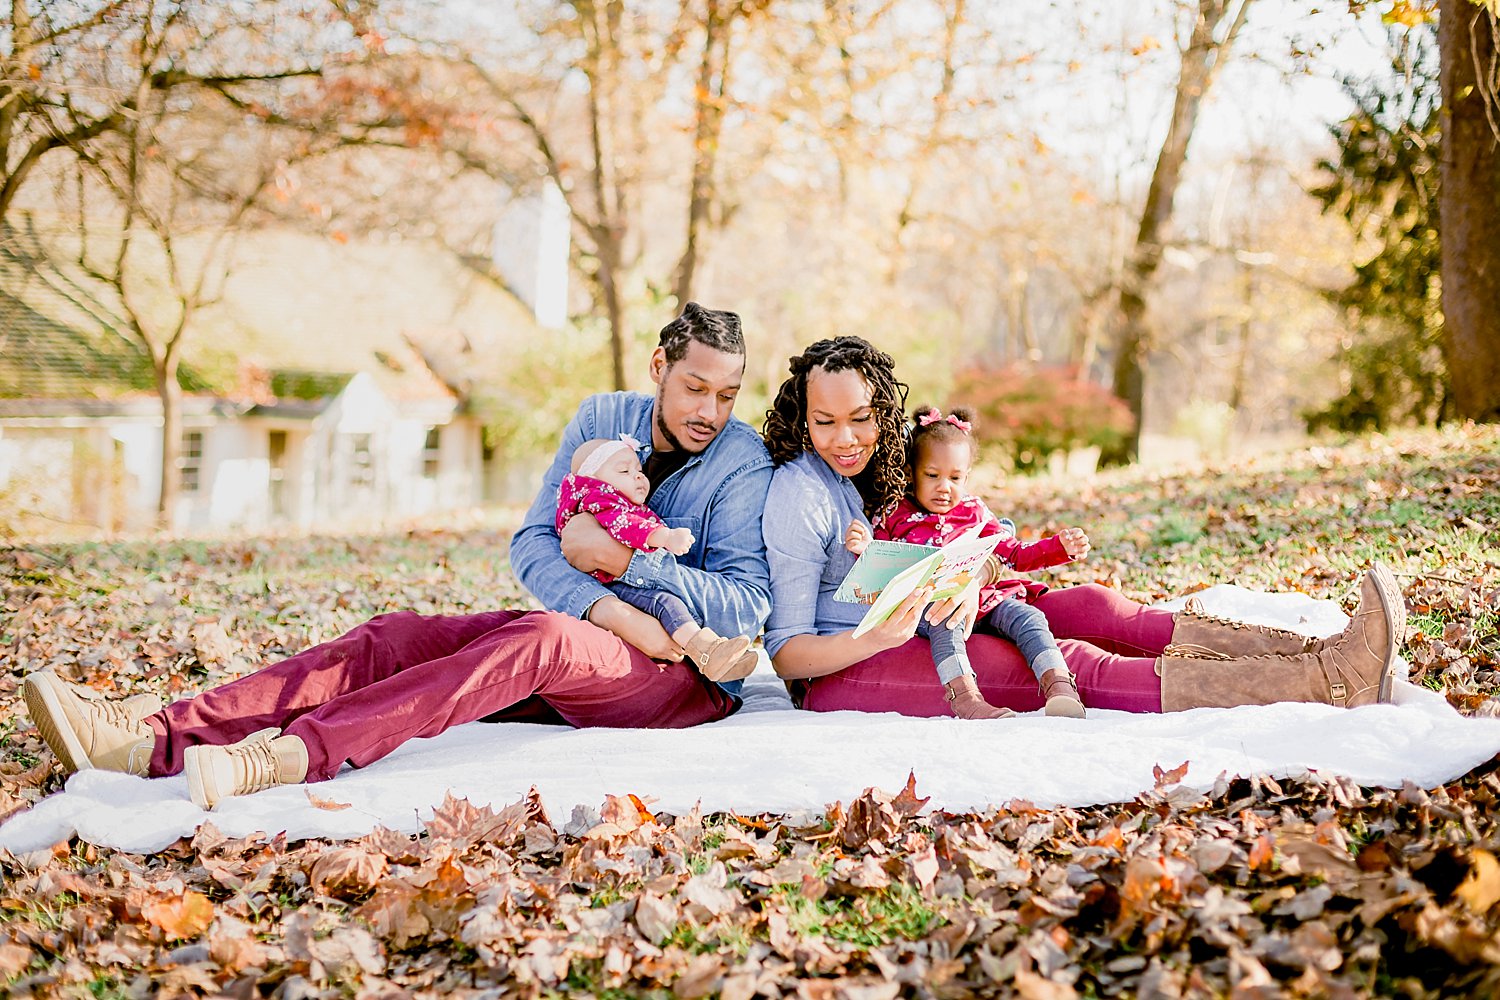 family of four sit on a neutral colored blanket to read a story book in the park